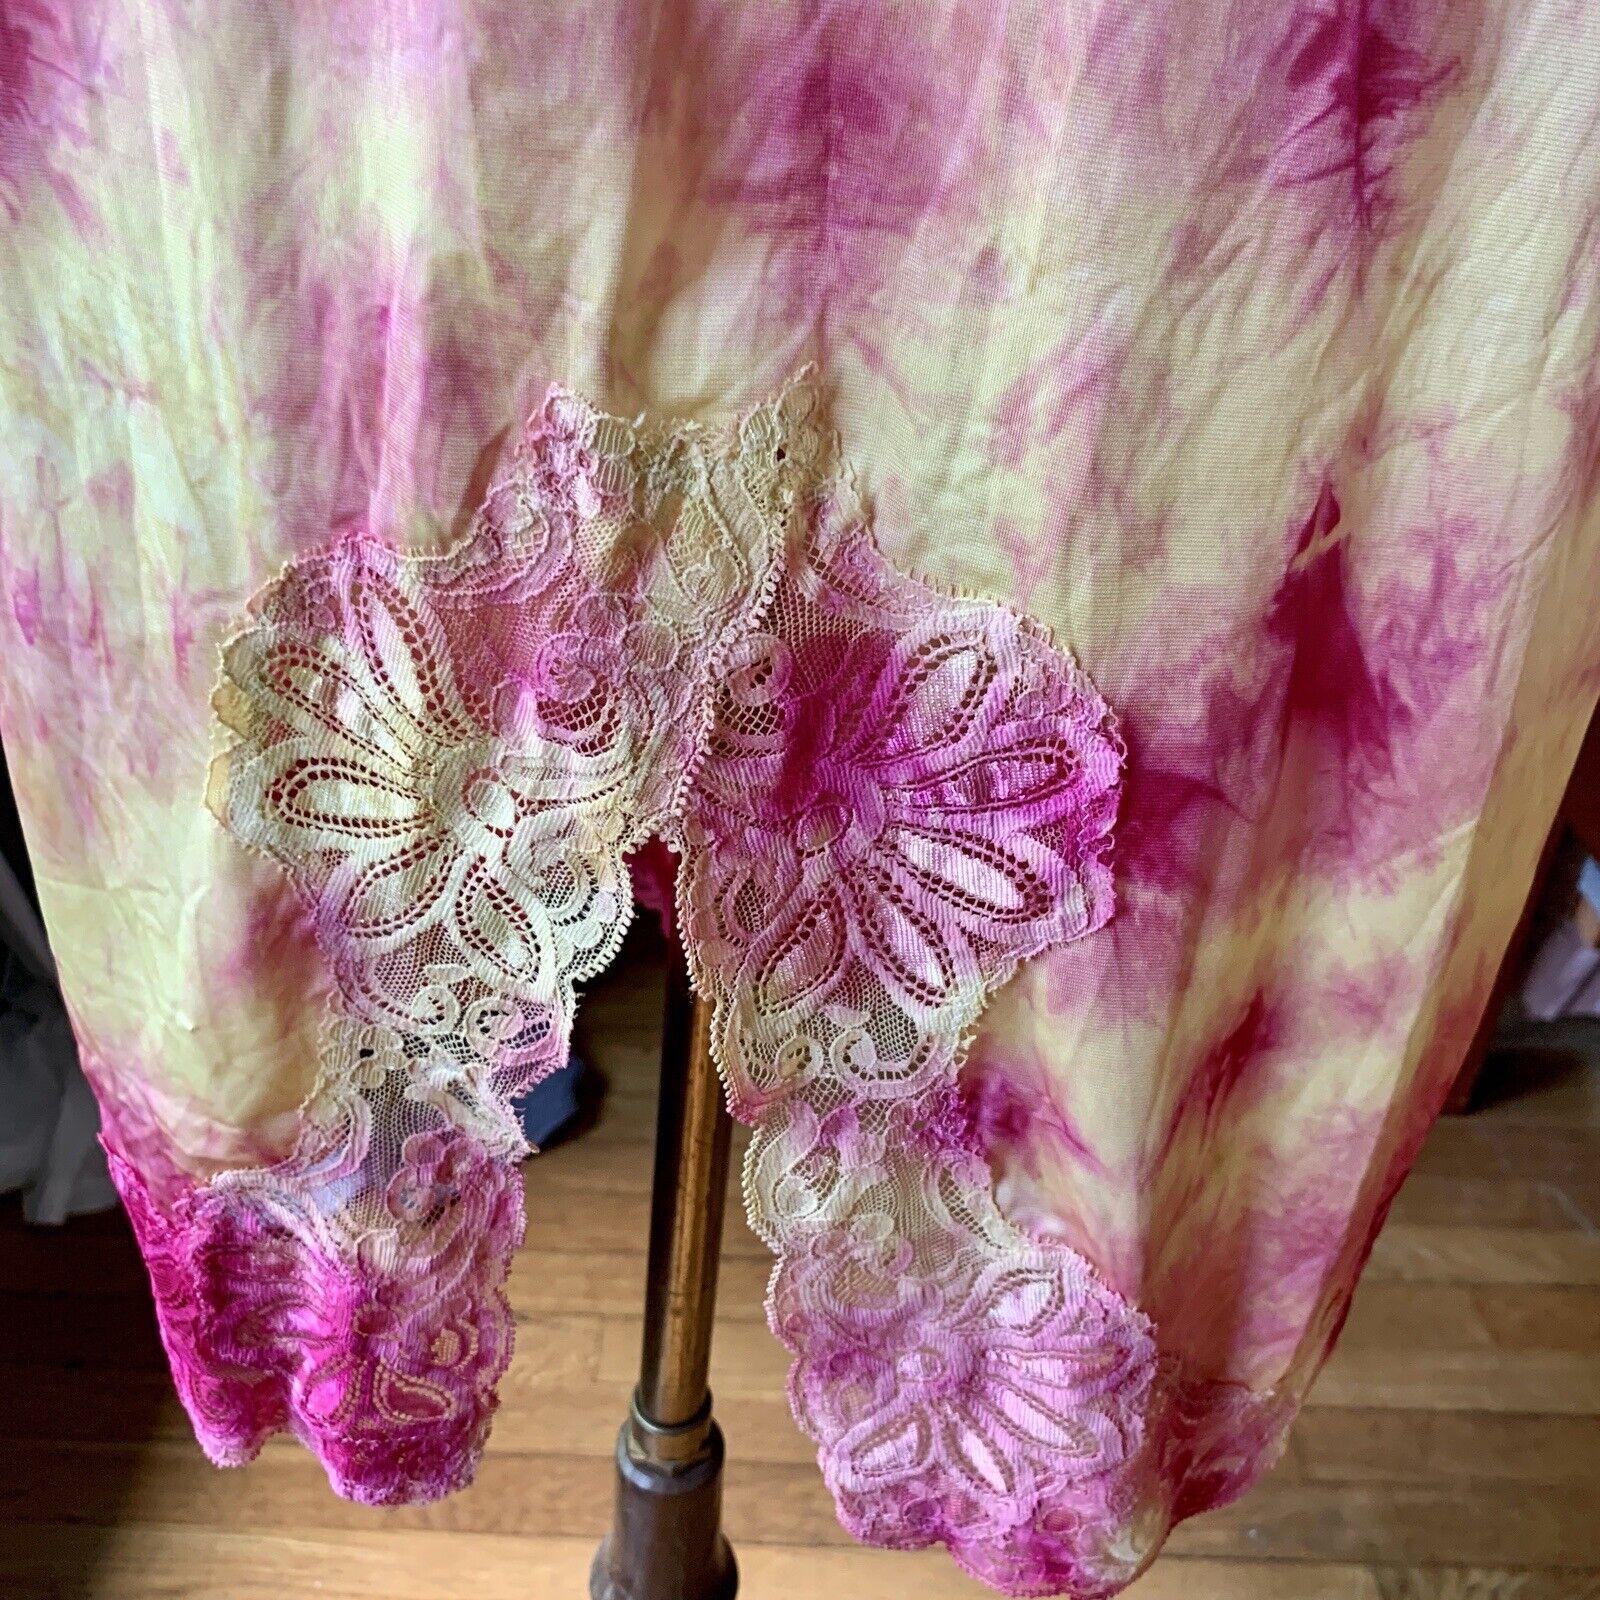 DYED PETALS Vintage Hand Botanically Dyed Tie-Dyed Slip Dress S/M 34 For Sale 4